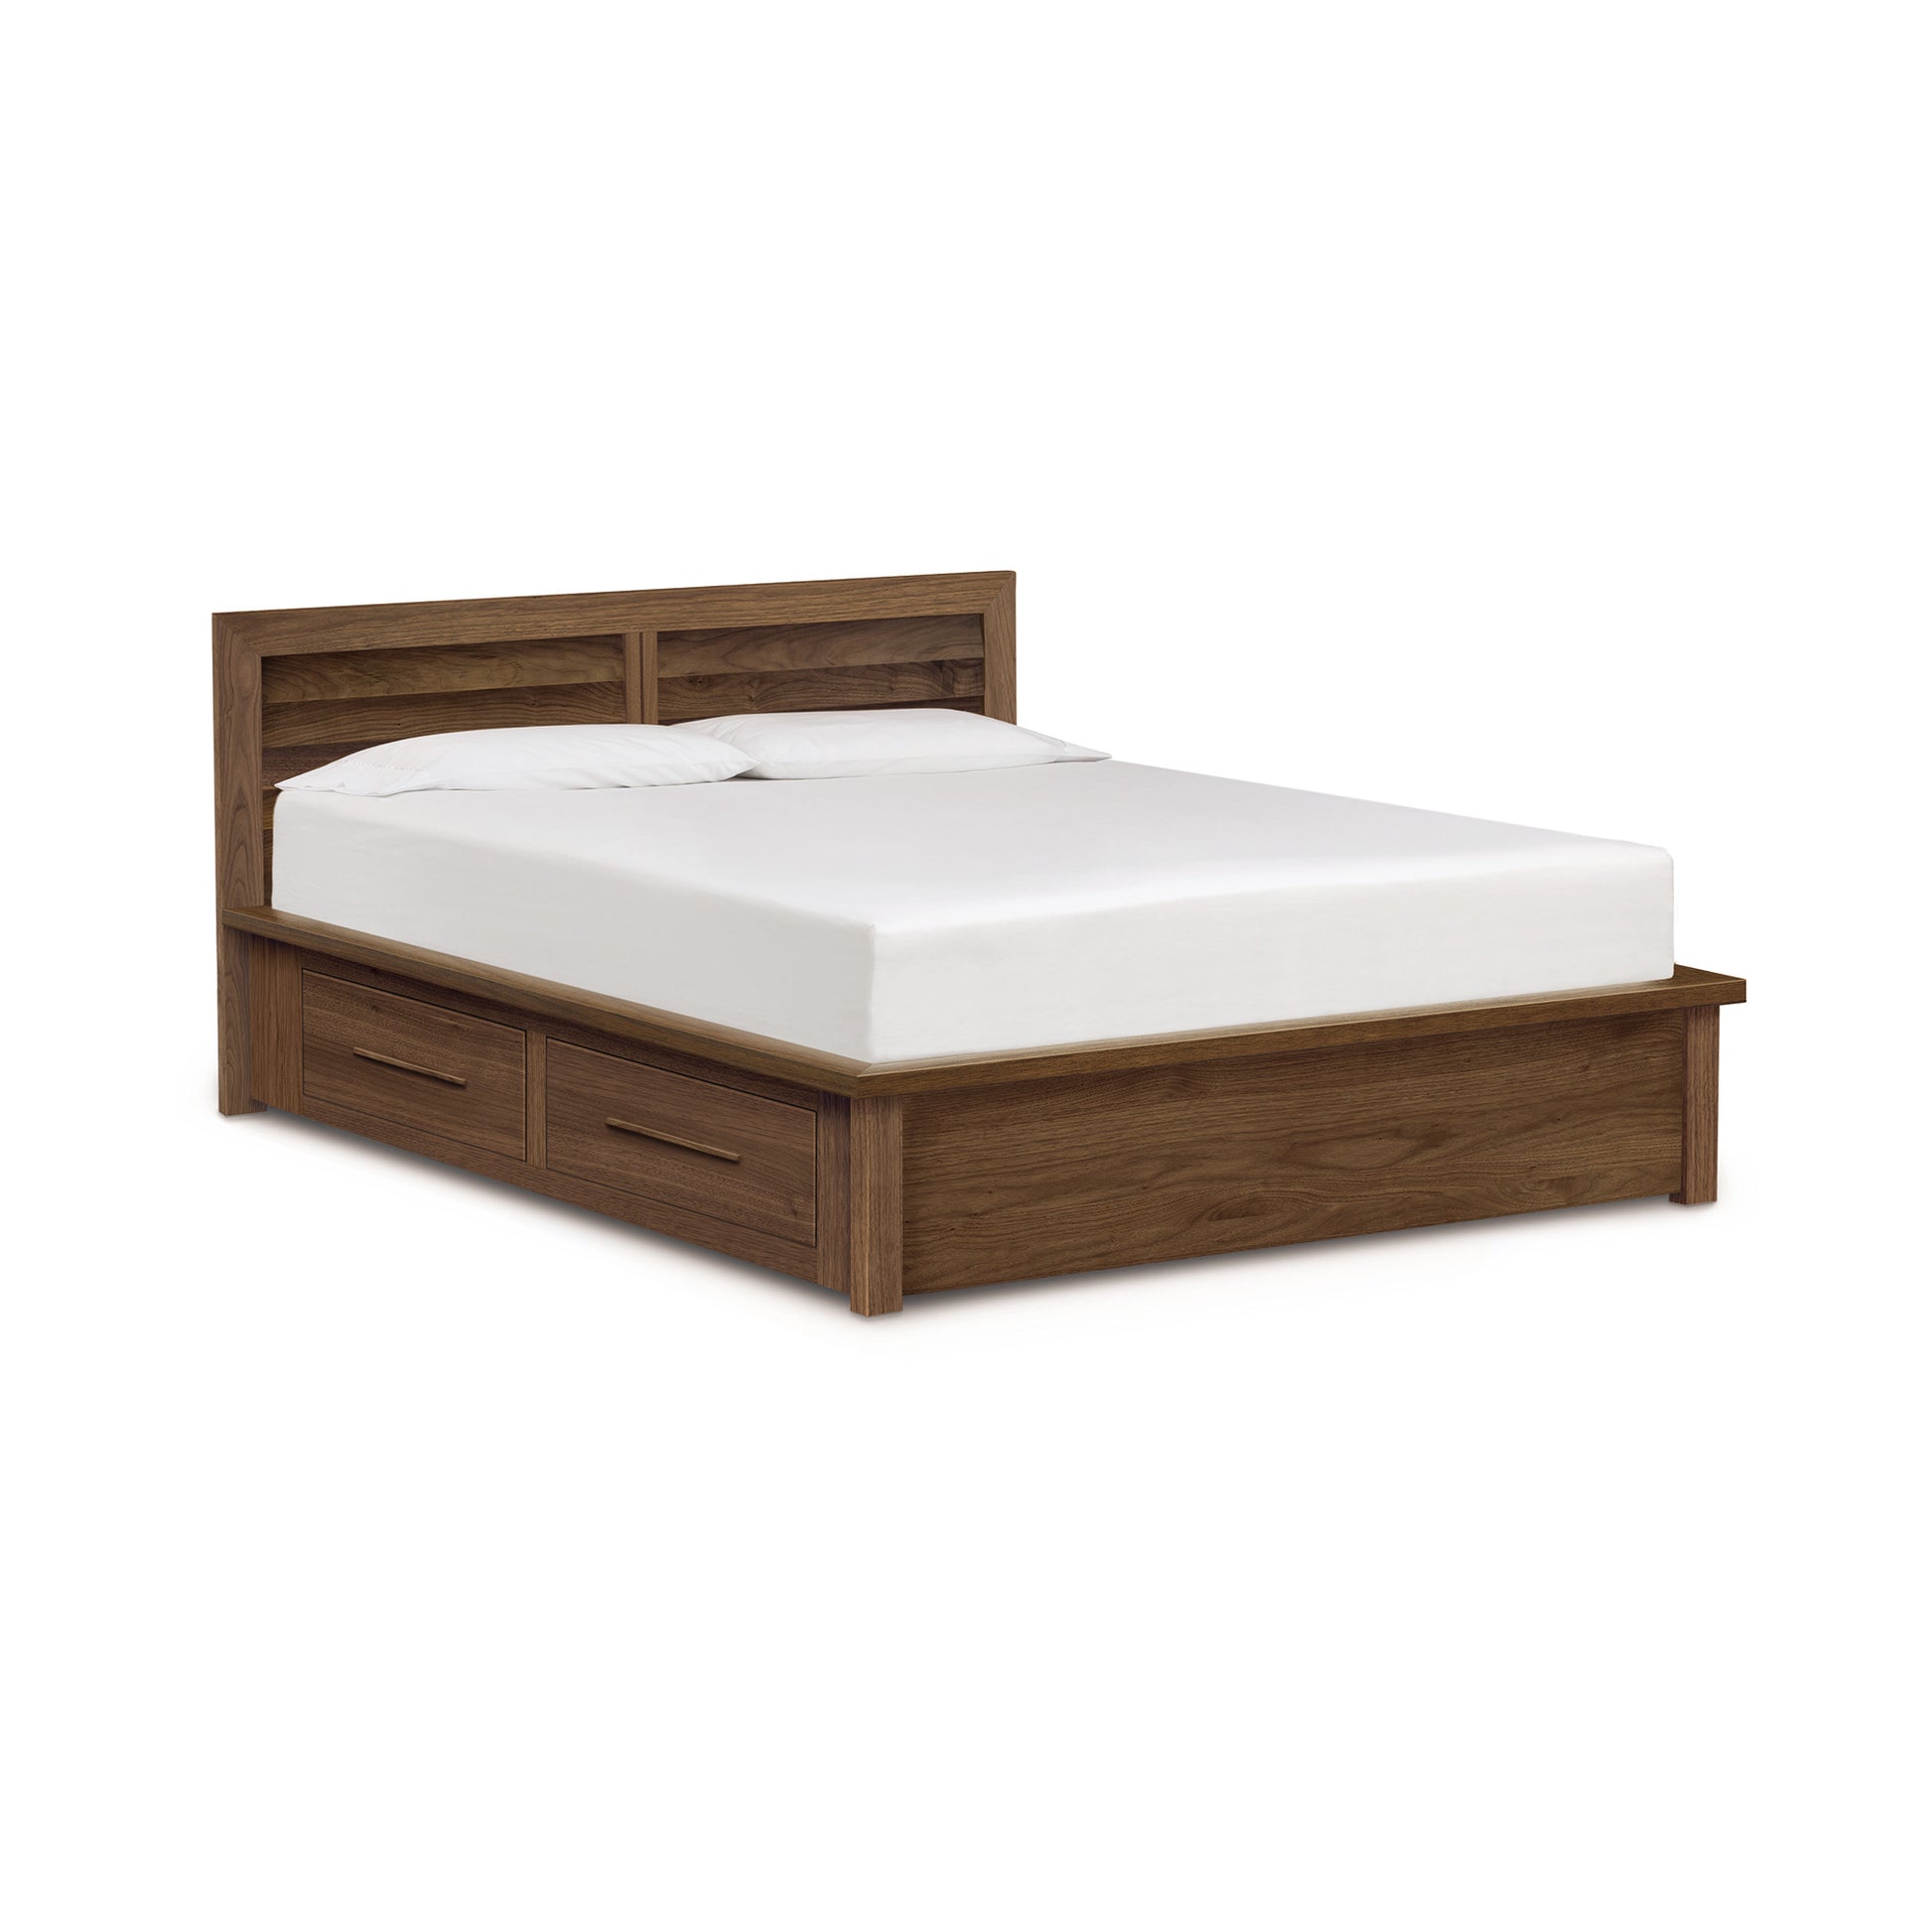 Solid cherry hardwood Moduluxe Storage Bed with Clapboard Headboard - 35" Series by Copeland Furniture with storage drawers and a white mattress against a white background.